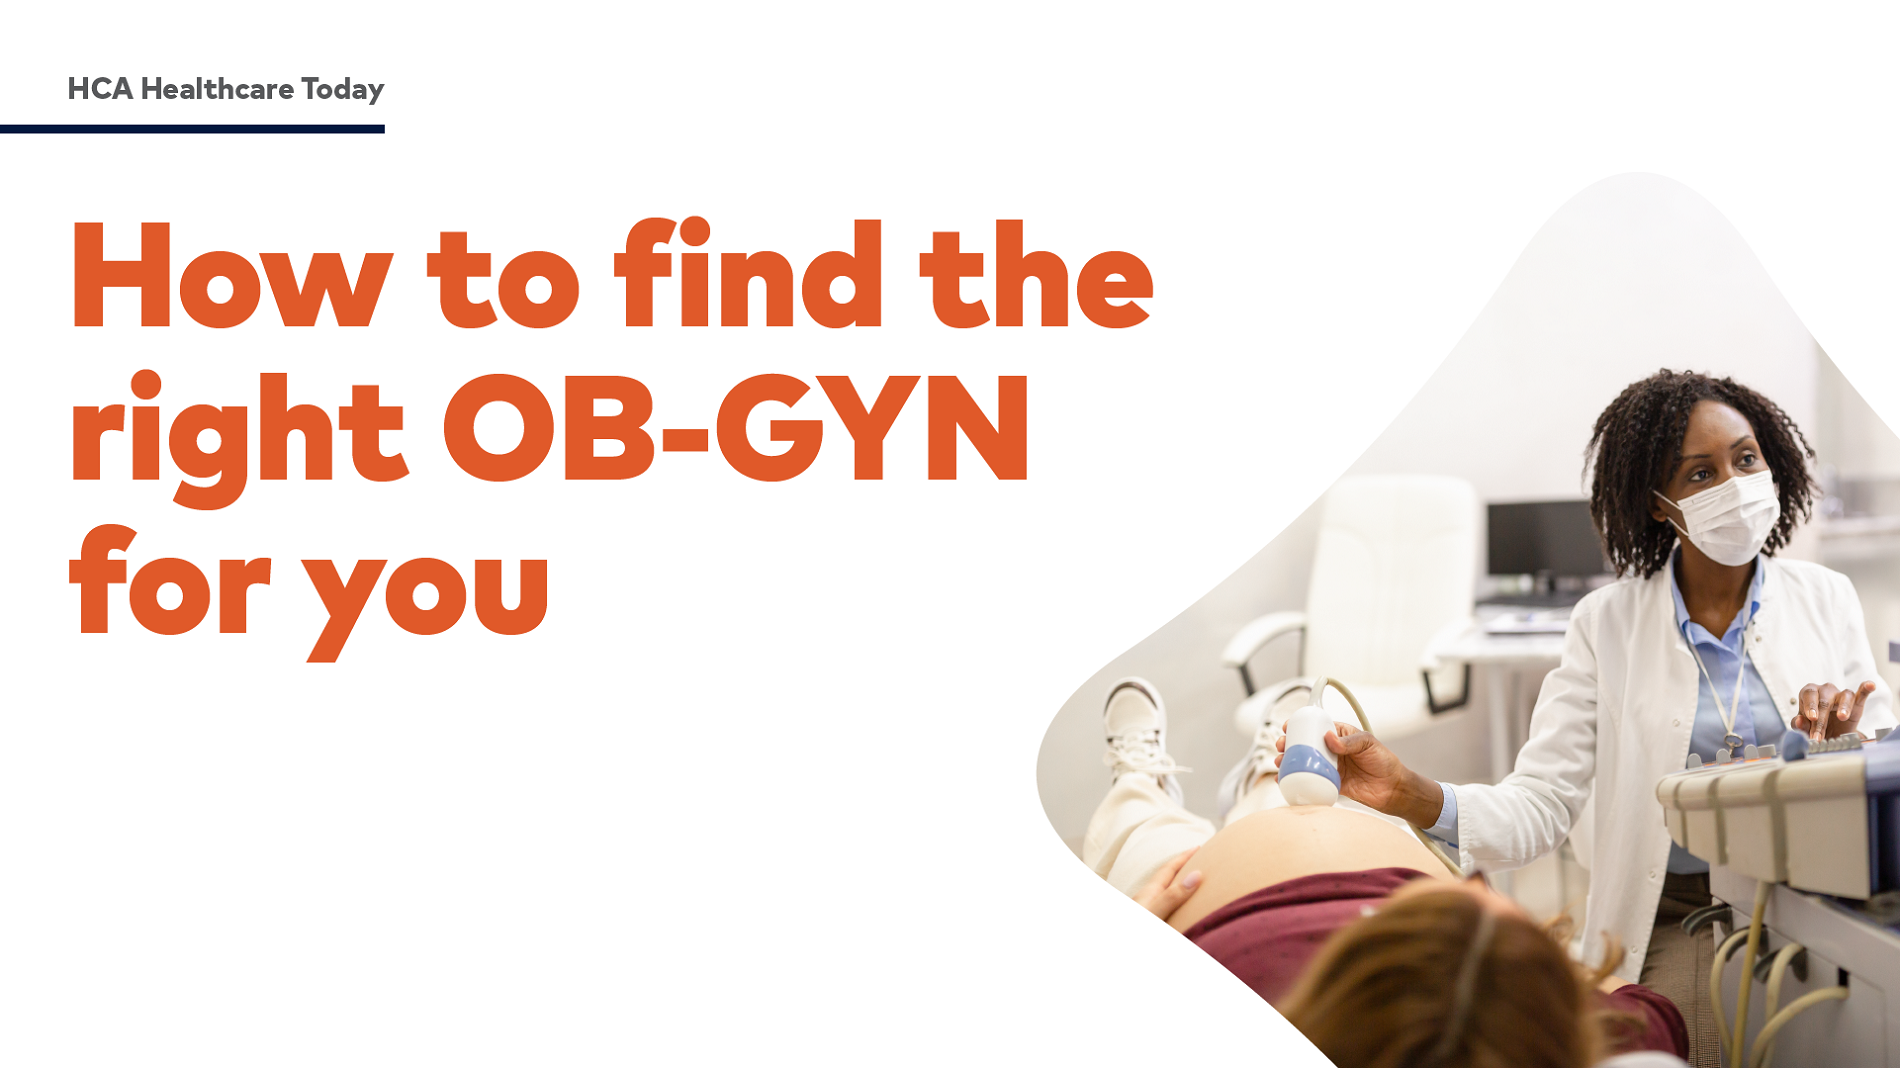 How to find the right OB-GYN for you - HCA Healthcare Today